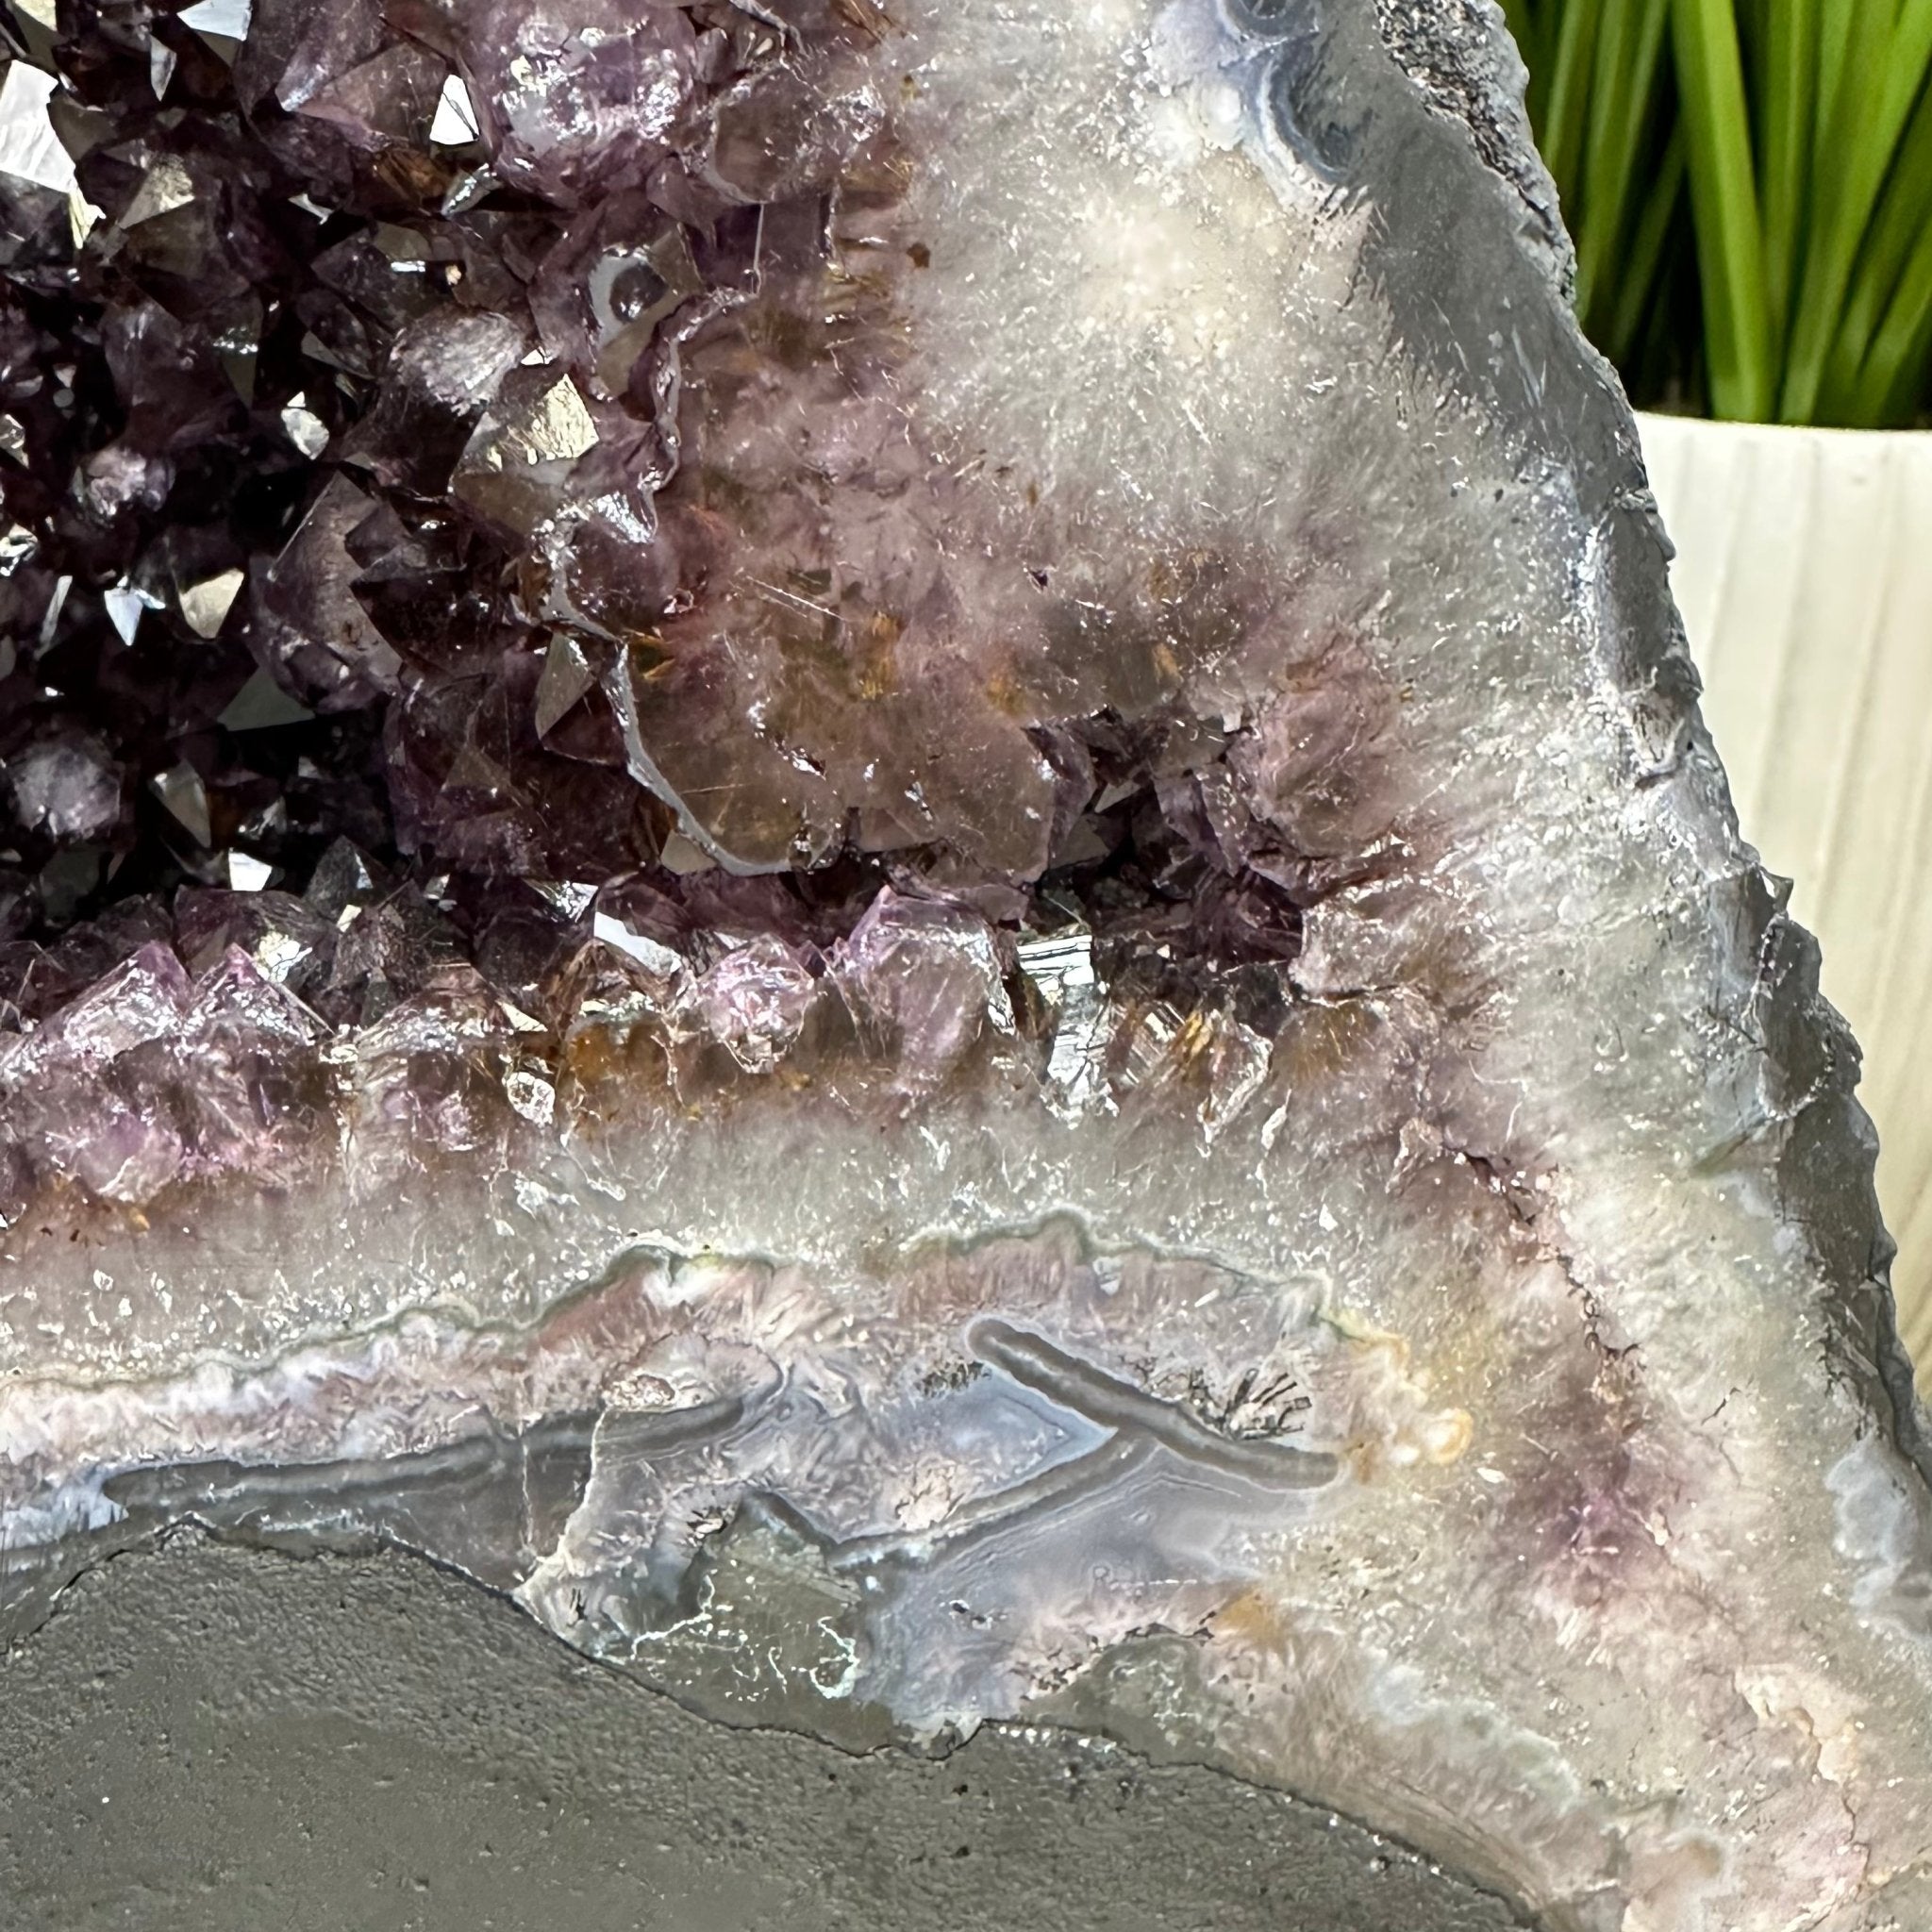 Extra Plus Quality Brazilian Amethyst Cathedral, 291.5 lbs & 61.5" Tall, Model #5601-1229 by Brazil Gems - Brazil GemsBrazil GemsExtra Plus Quality Brazilian Amethyst Cathedral, 291.5 lbs & 61.5" Tall, Model #5601-1229 by Brazil GemsCathedrals5601-1229